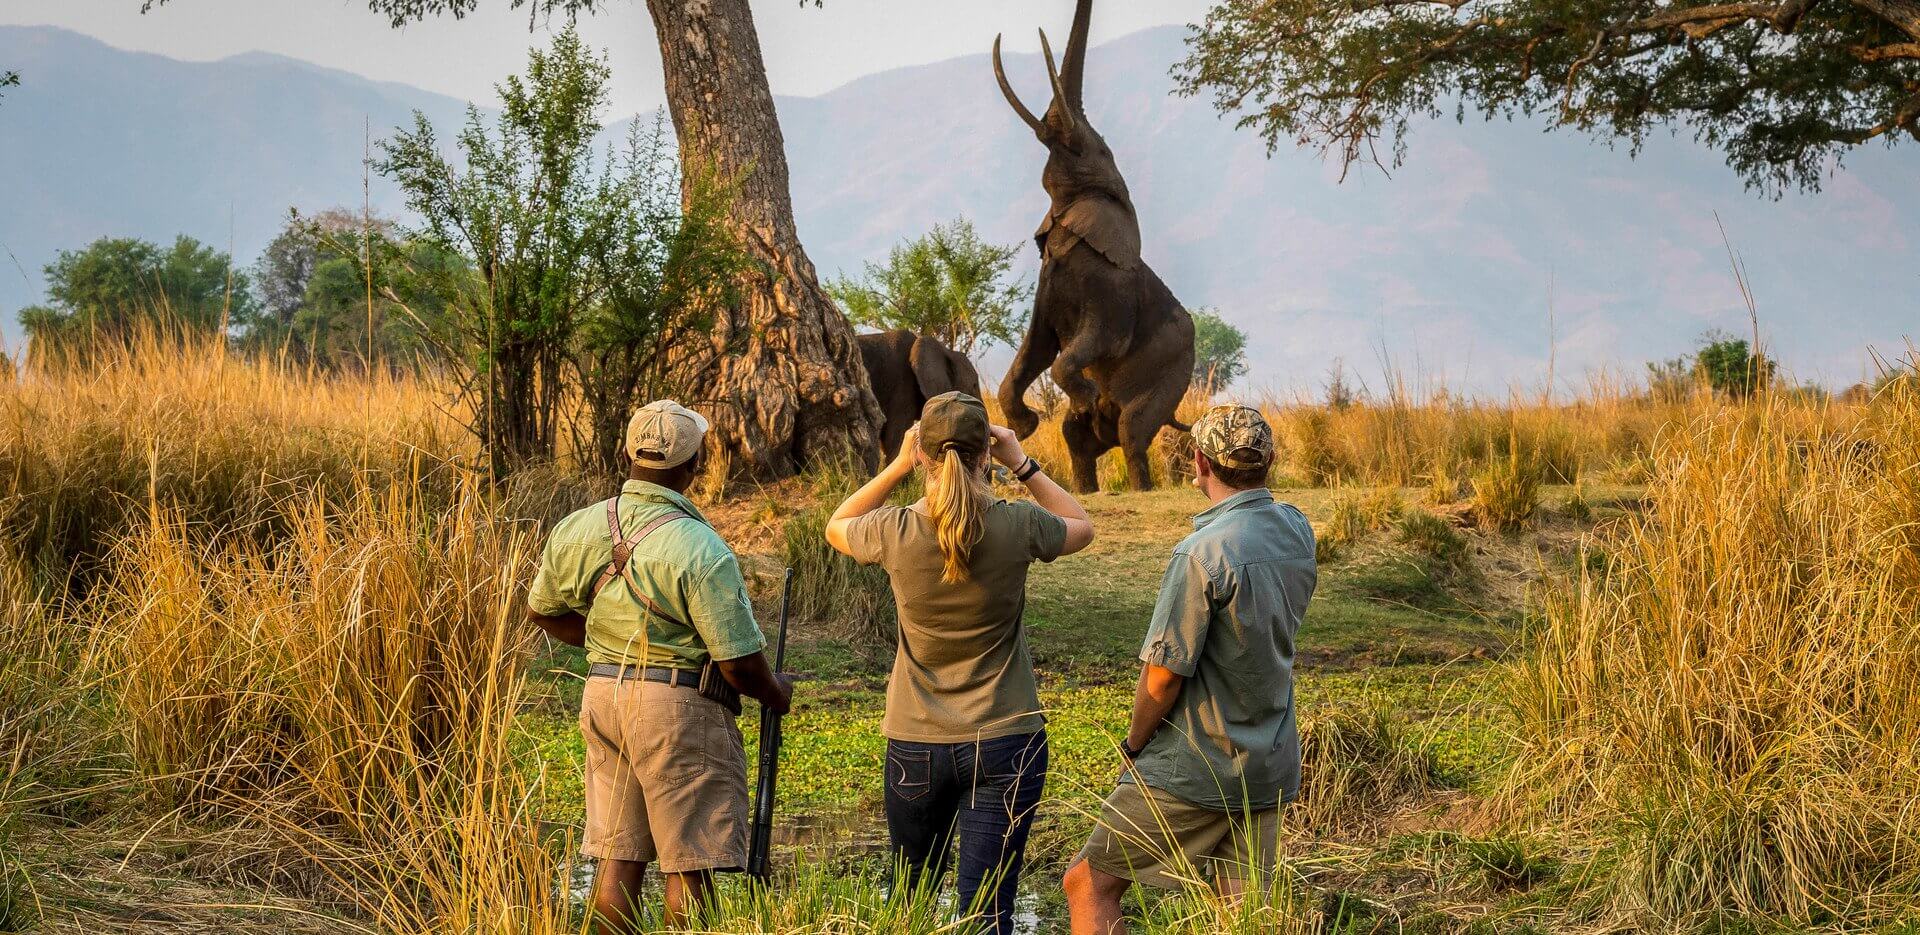 three people watching an elephant foraging in the wild, standing on its hind legs